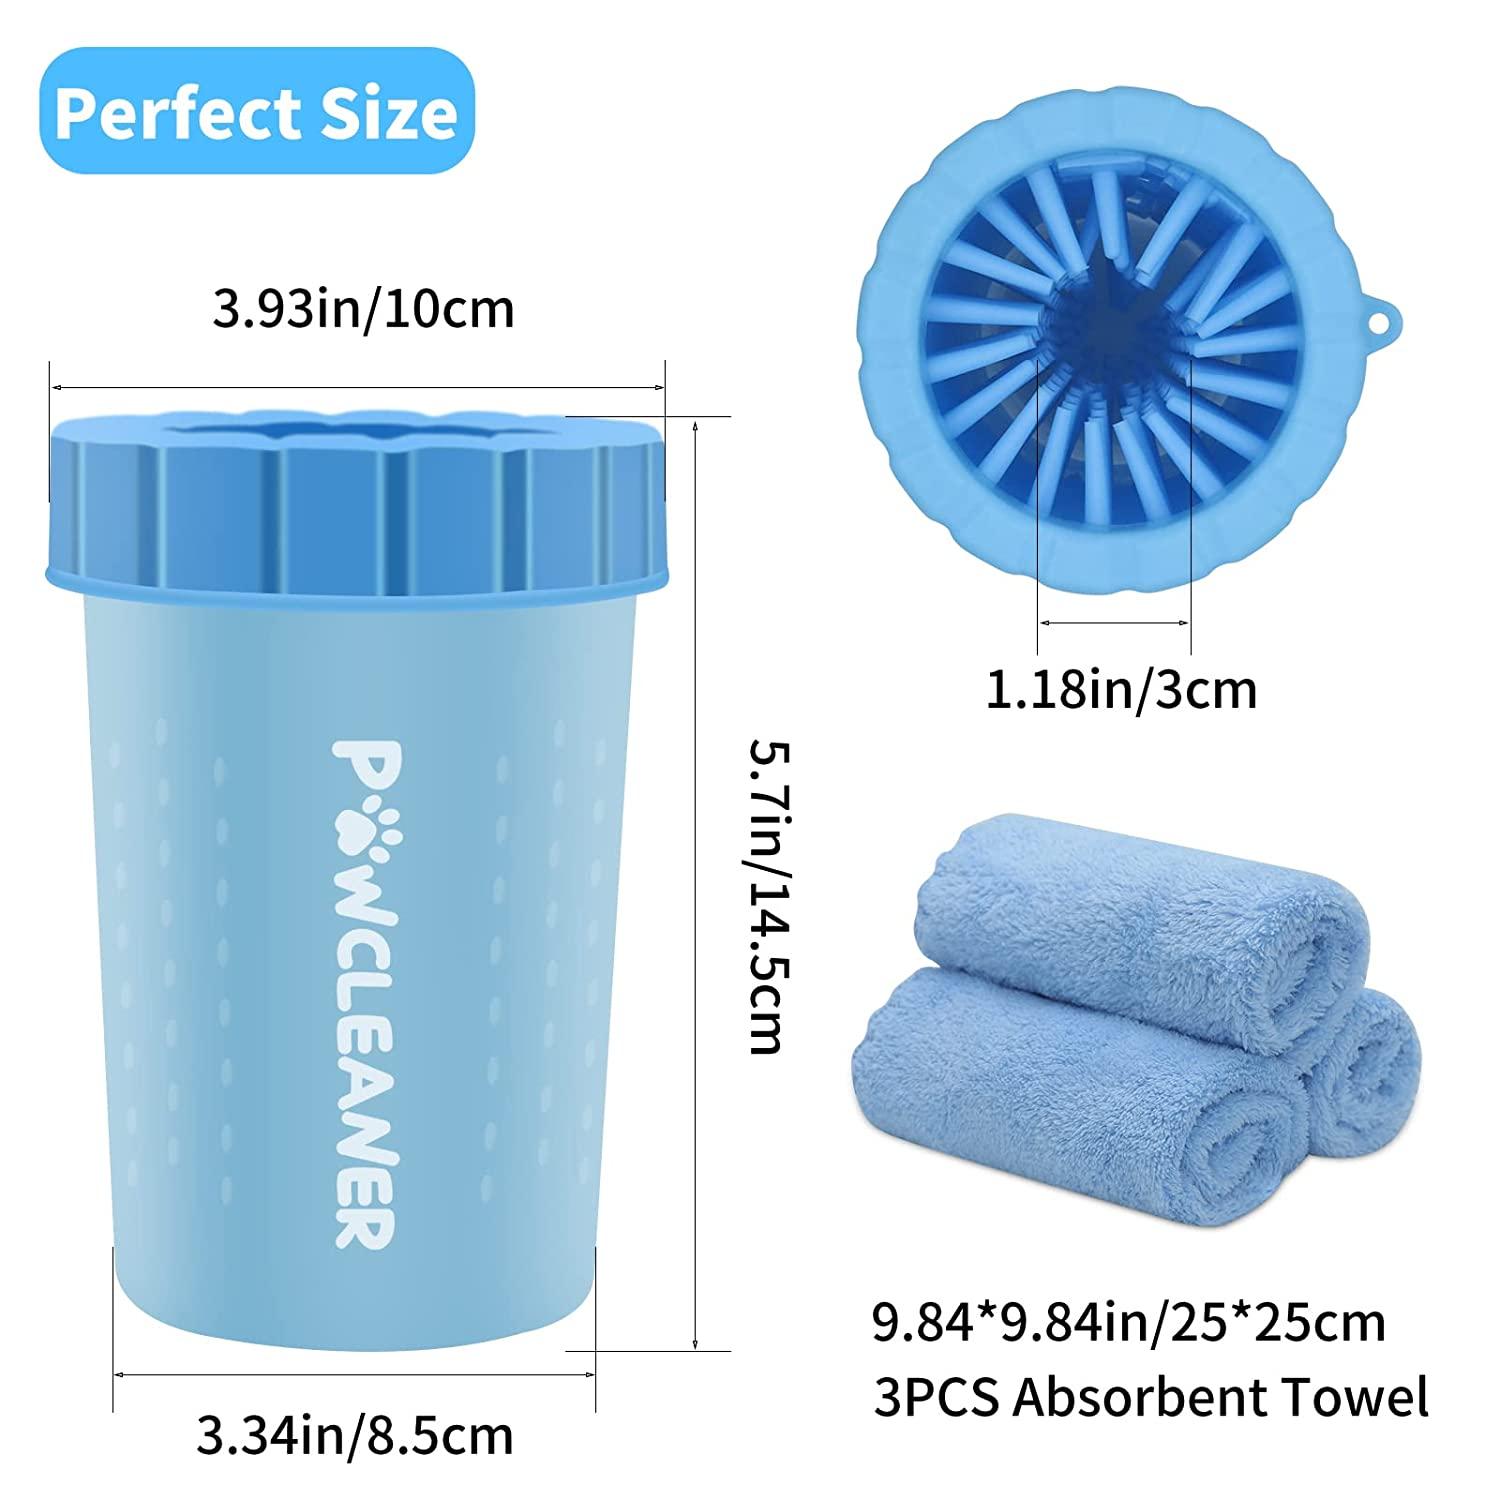 Comotech Dog Paw Cleaner, Washer, Buddy Muddy Pet Foot Cleaner for Small Medium Large Breed Dogs/Cats (with 3 Absorbent Towel)